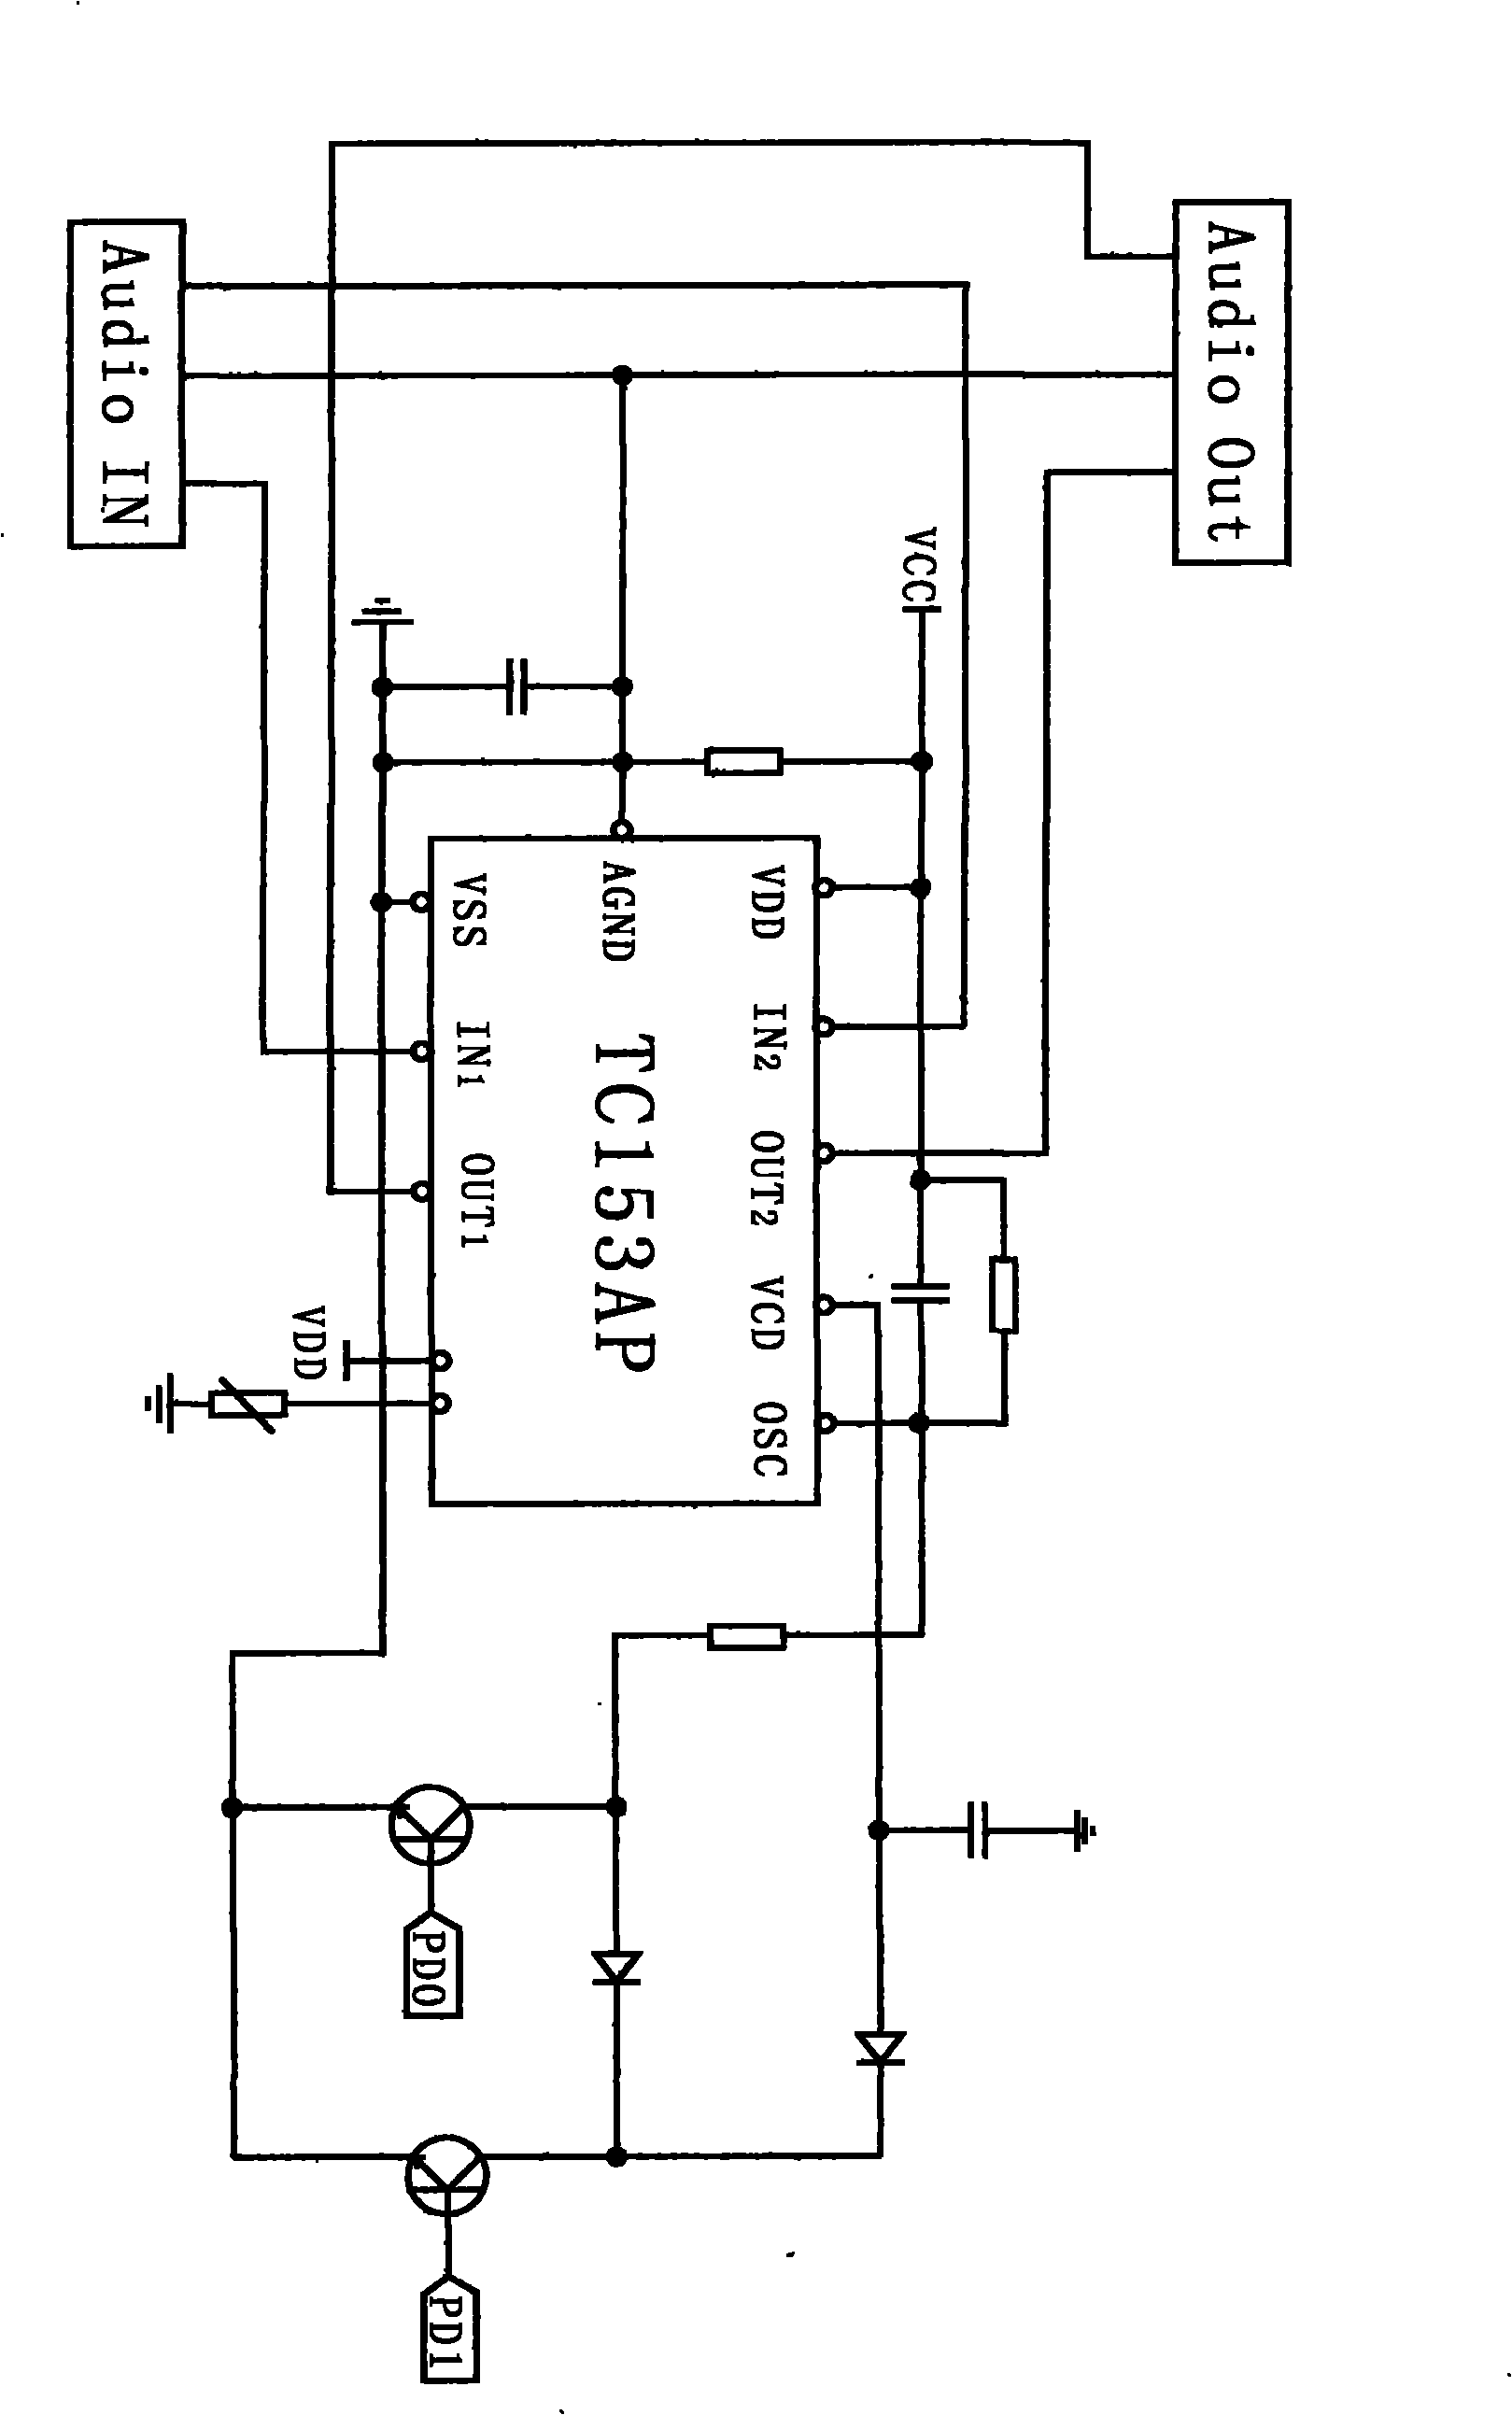 Device for automatically adjusting volume of audio equipment according to frequency of outside sound